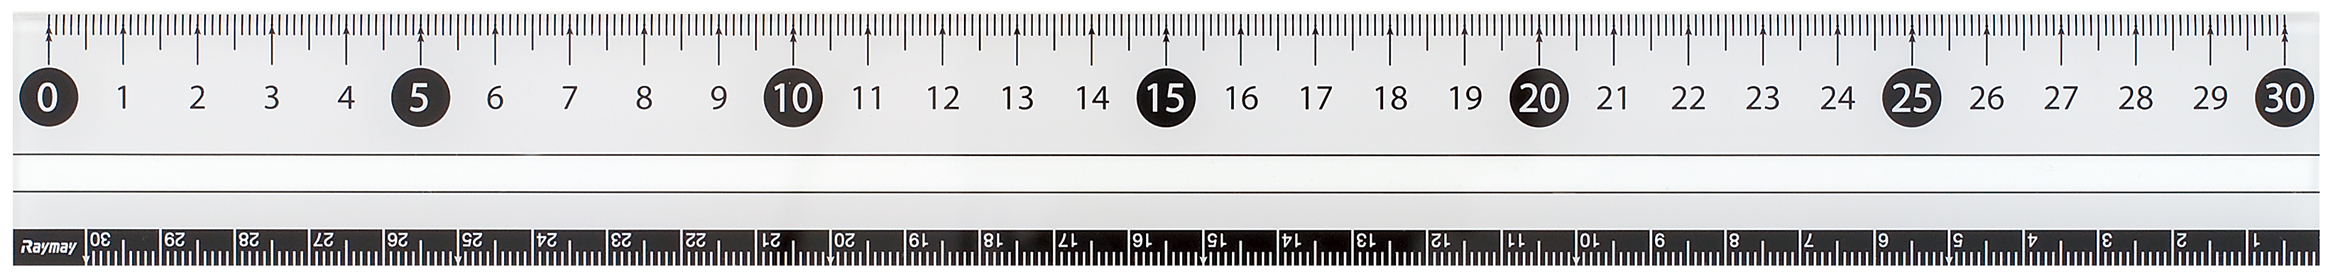 Monochrome ruler 30cm white APJ281W which is easy to look at the RAYMAYFUJII ruler 【送料無料・単価213円×40セット】レイメイ藤井 見やすい白黒定規 30センチ 白 APJ281W レイメイ藤井 4902562355054（40セット）